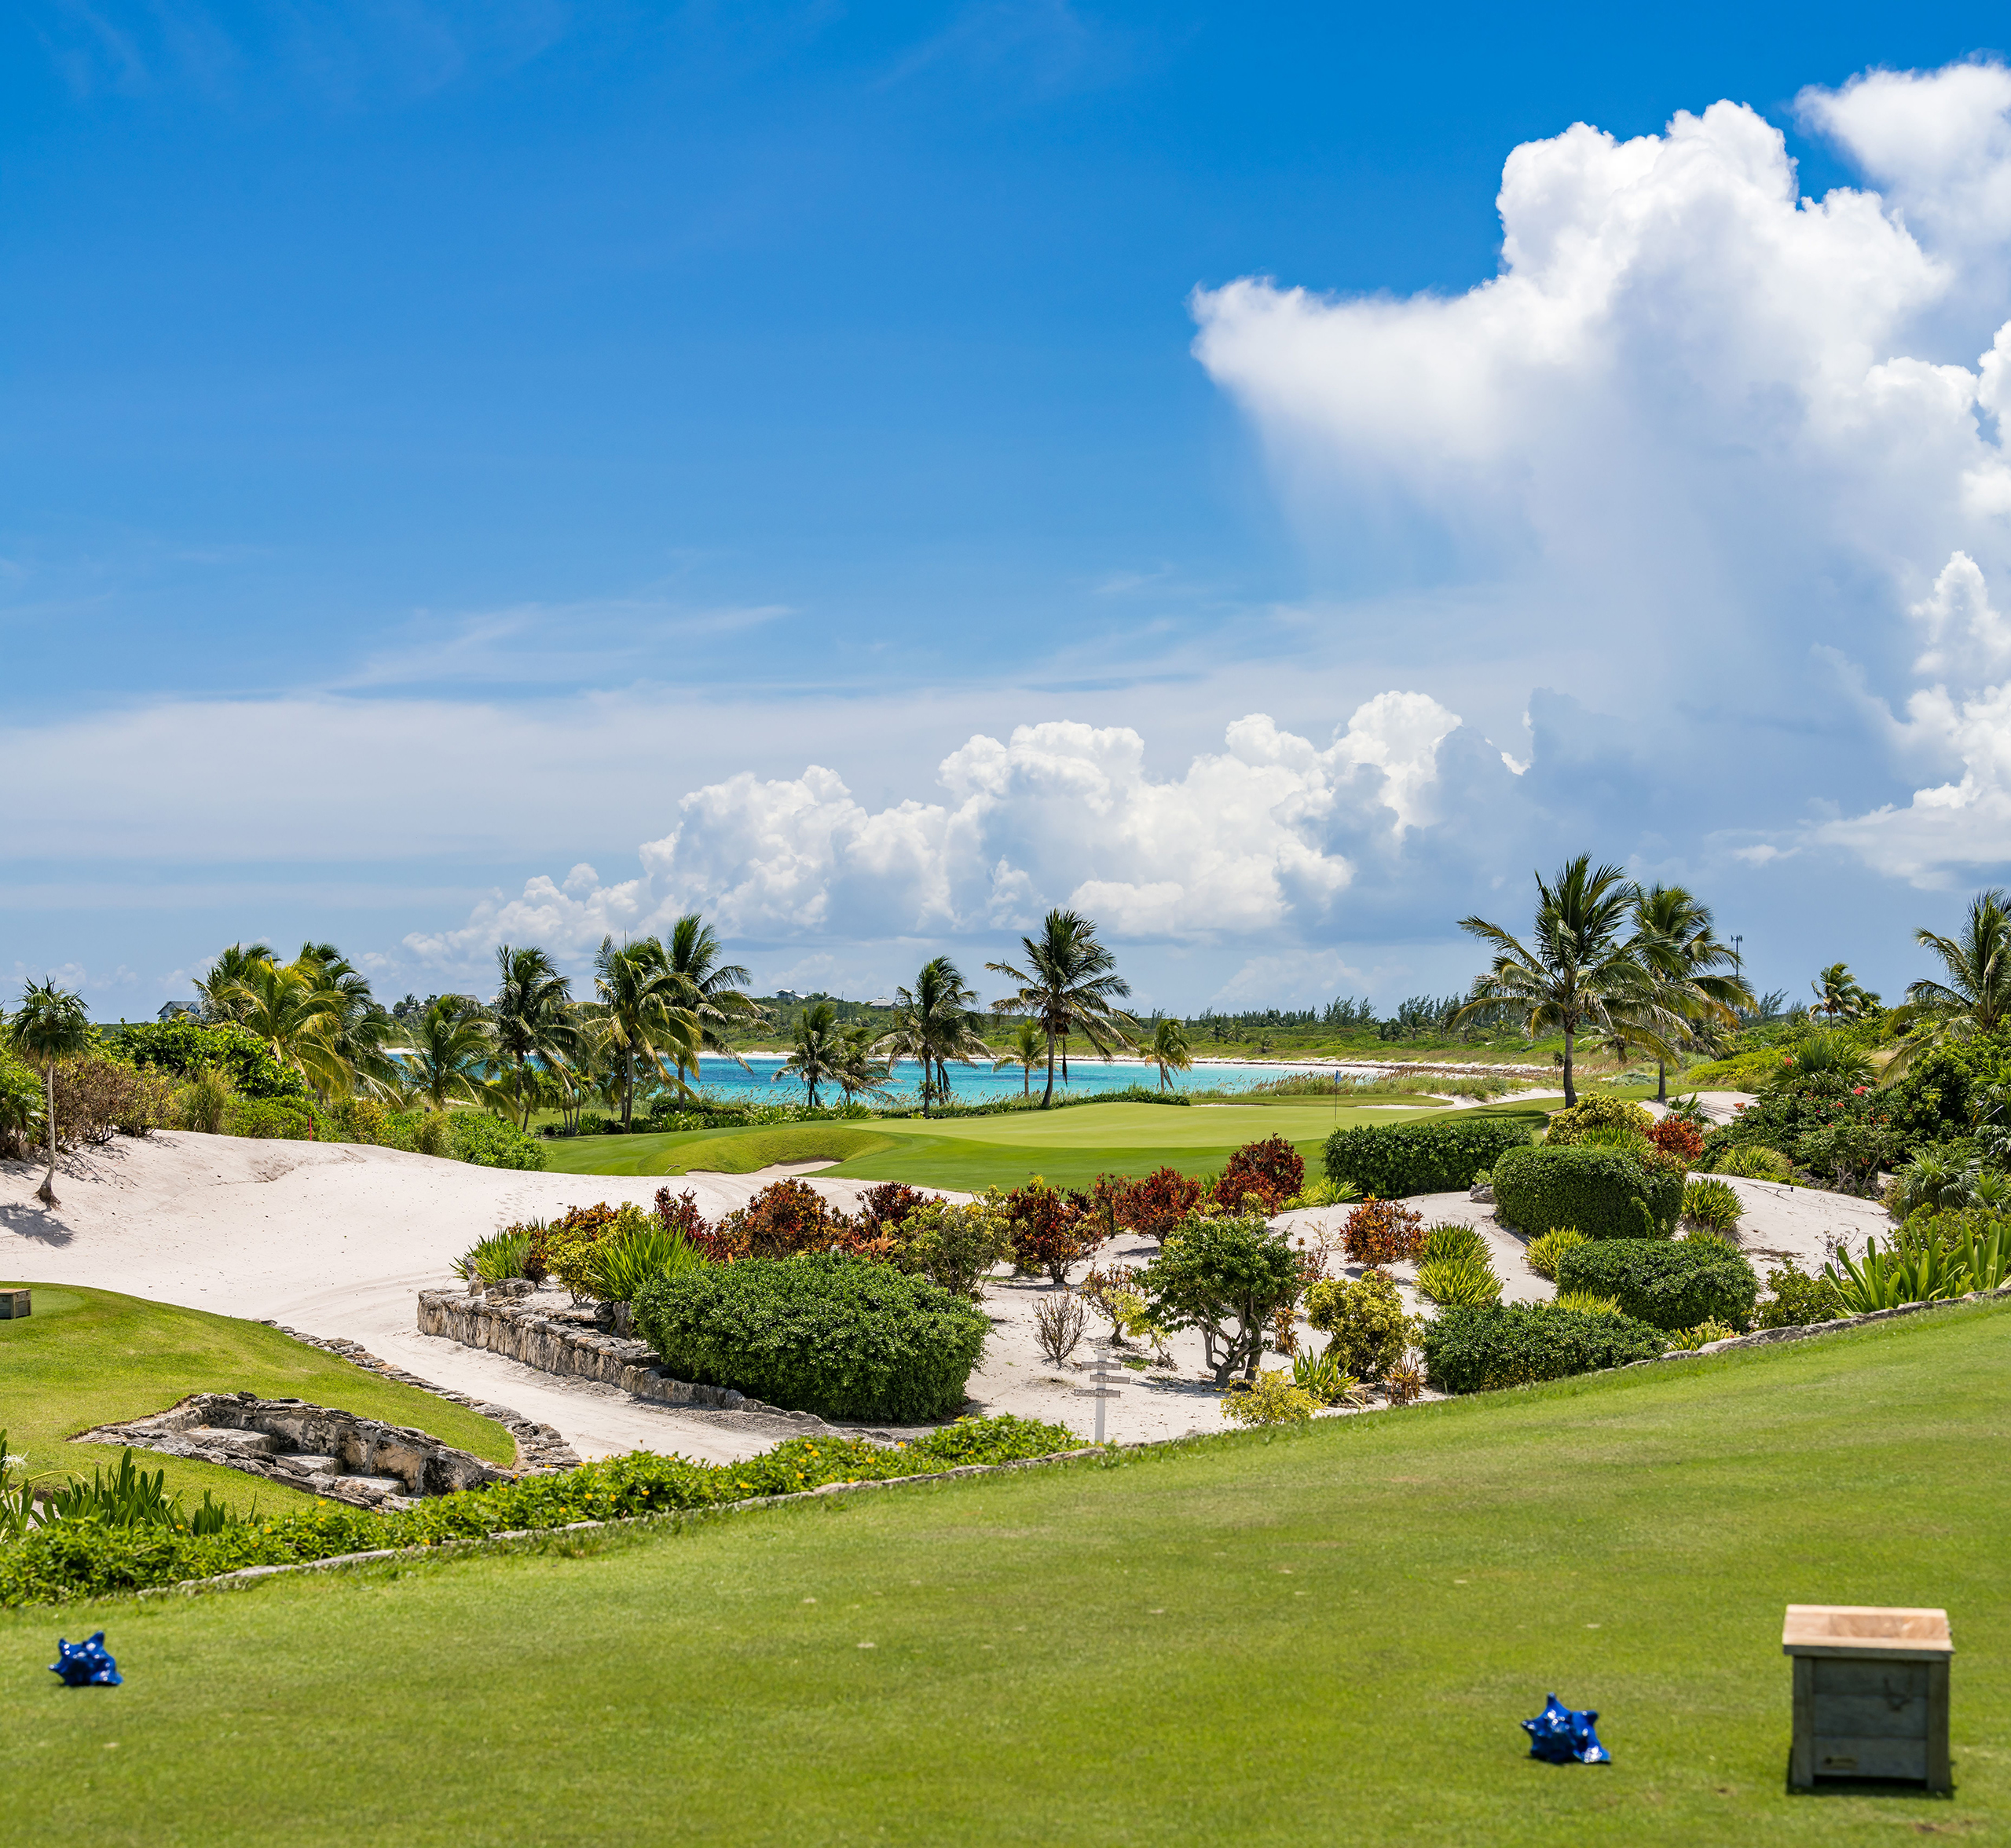 The Abaco Club golf course